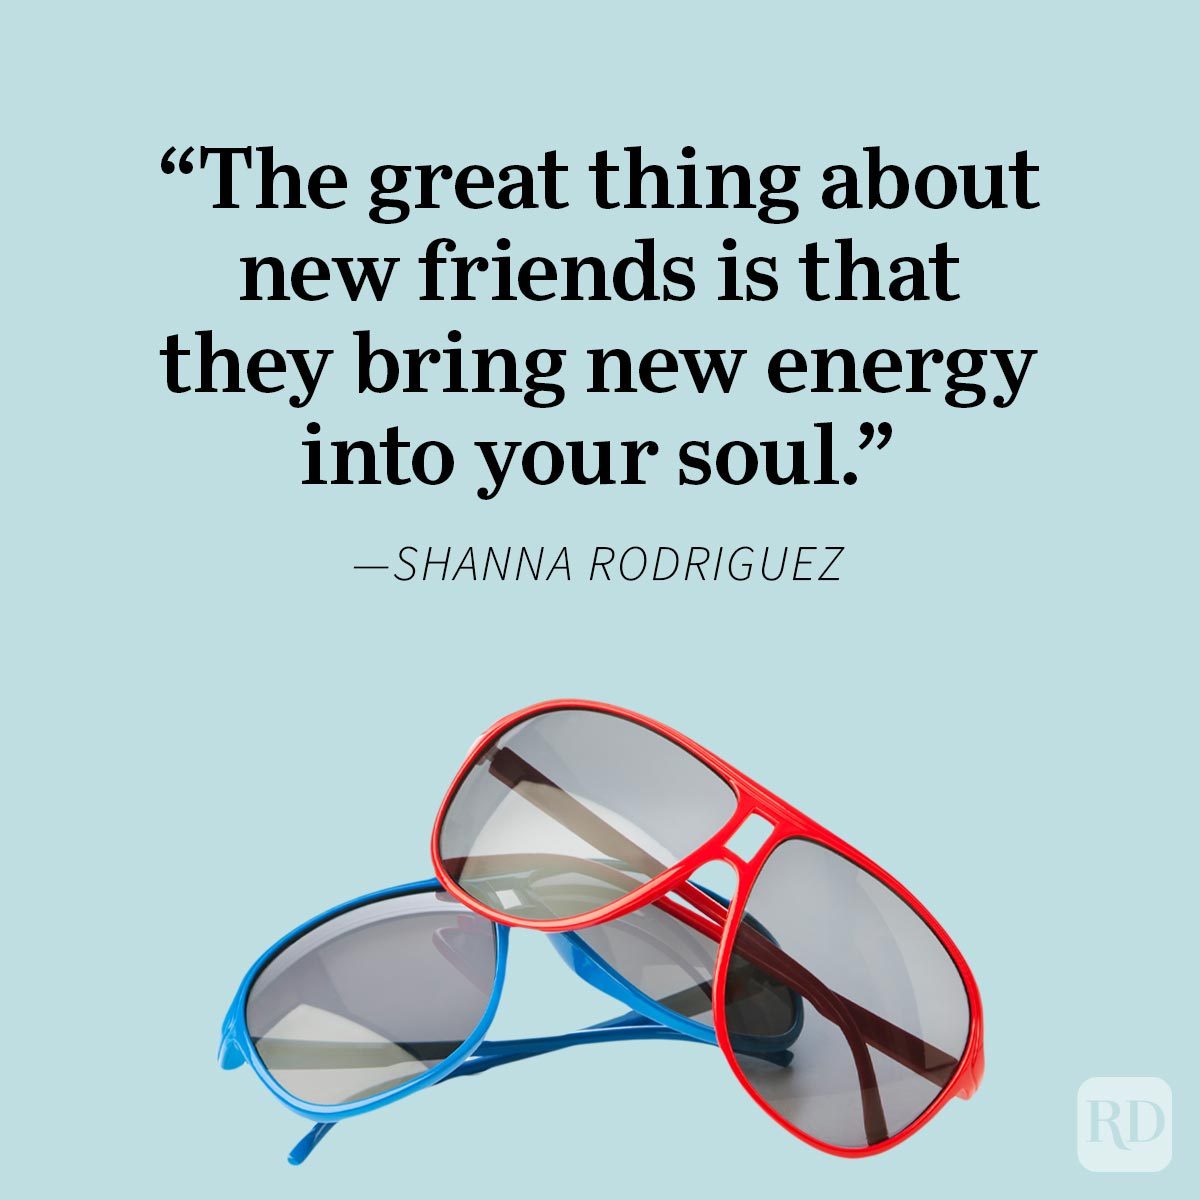 Friendship Quotes To Share With Your Bestie Shanna Rodriguez, red and blue sunglasses, blue